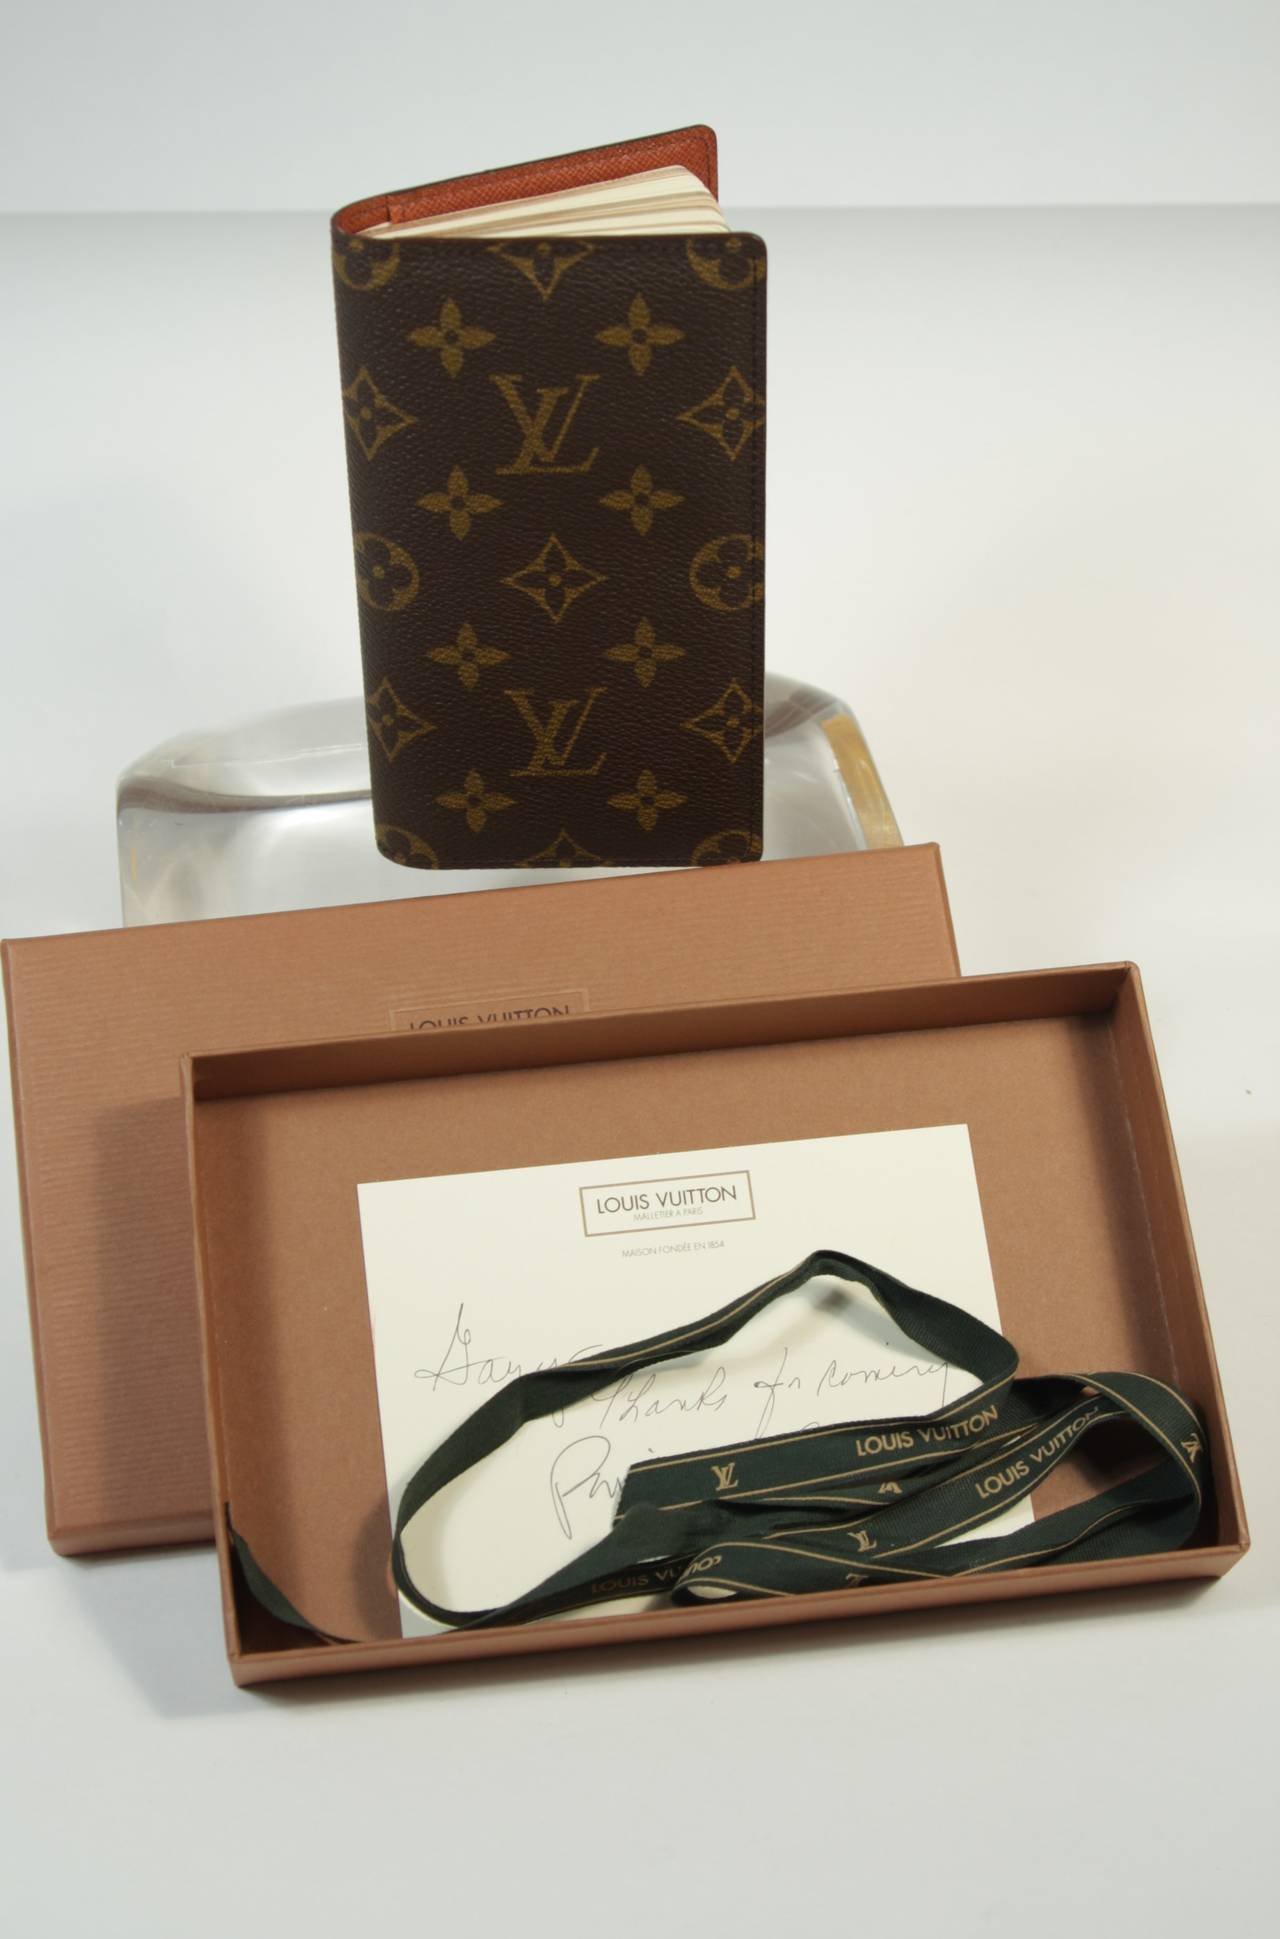 Louis Vuitton Monogram Agenda Address Book and Planner with Card Holder 1